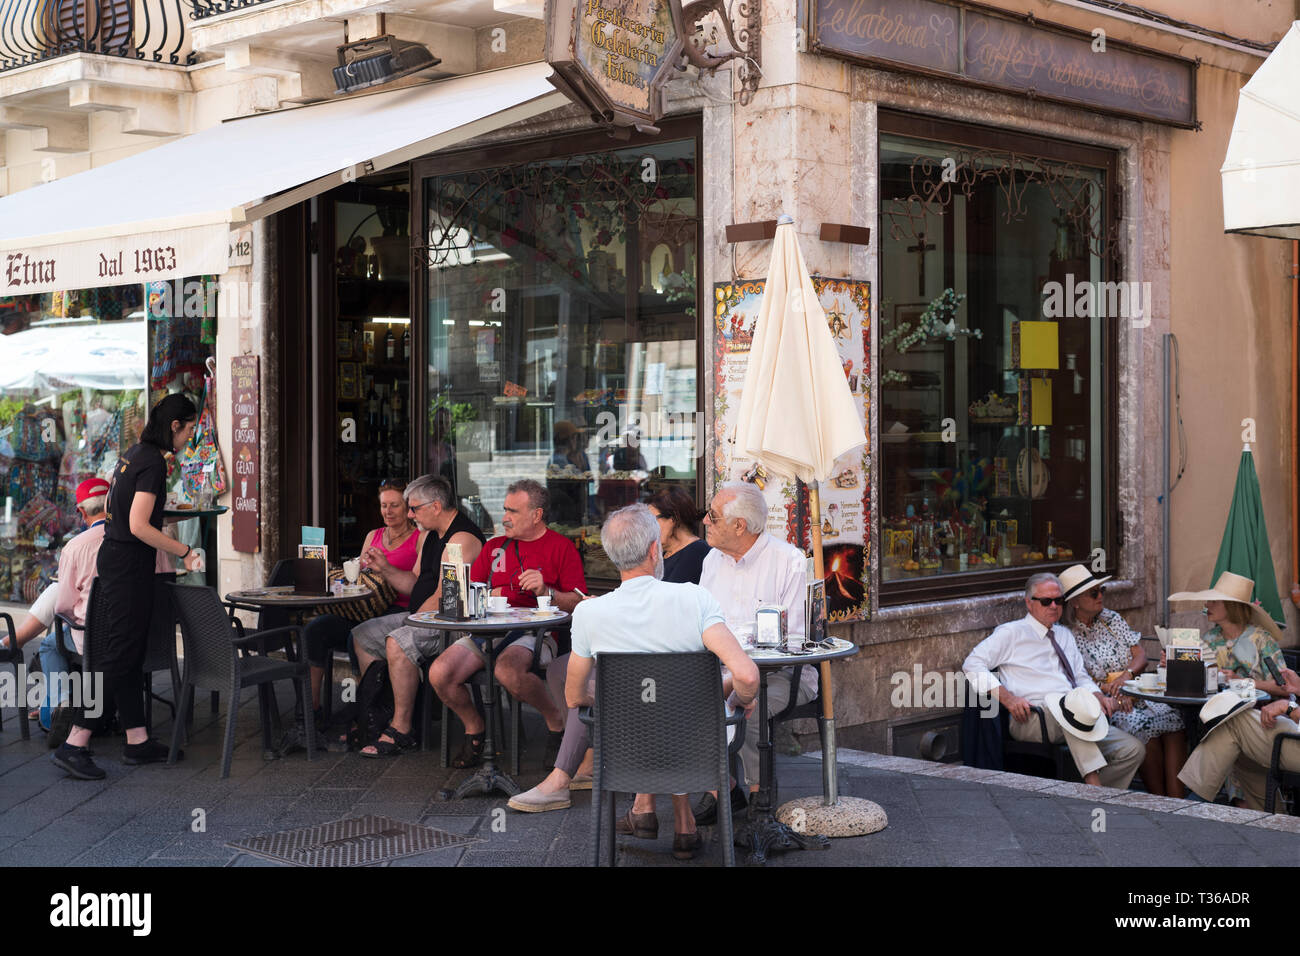 Cafe culture - people sitting at pavement cafeteria in Corso Umberto I in the city of Taormina, East Sicily, Italy Stock Photo